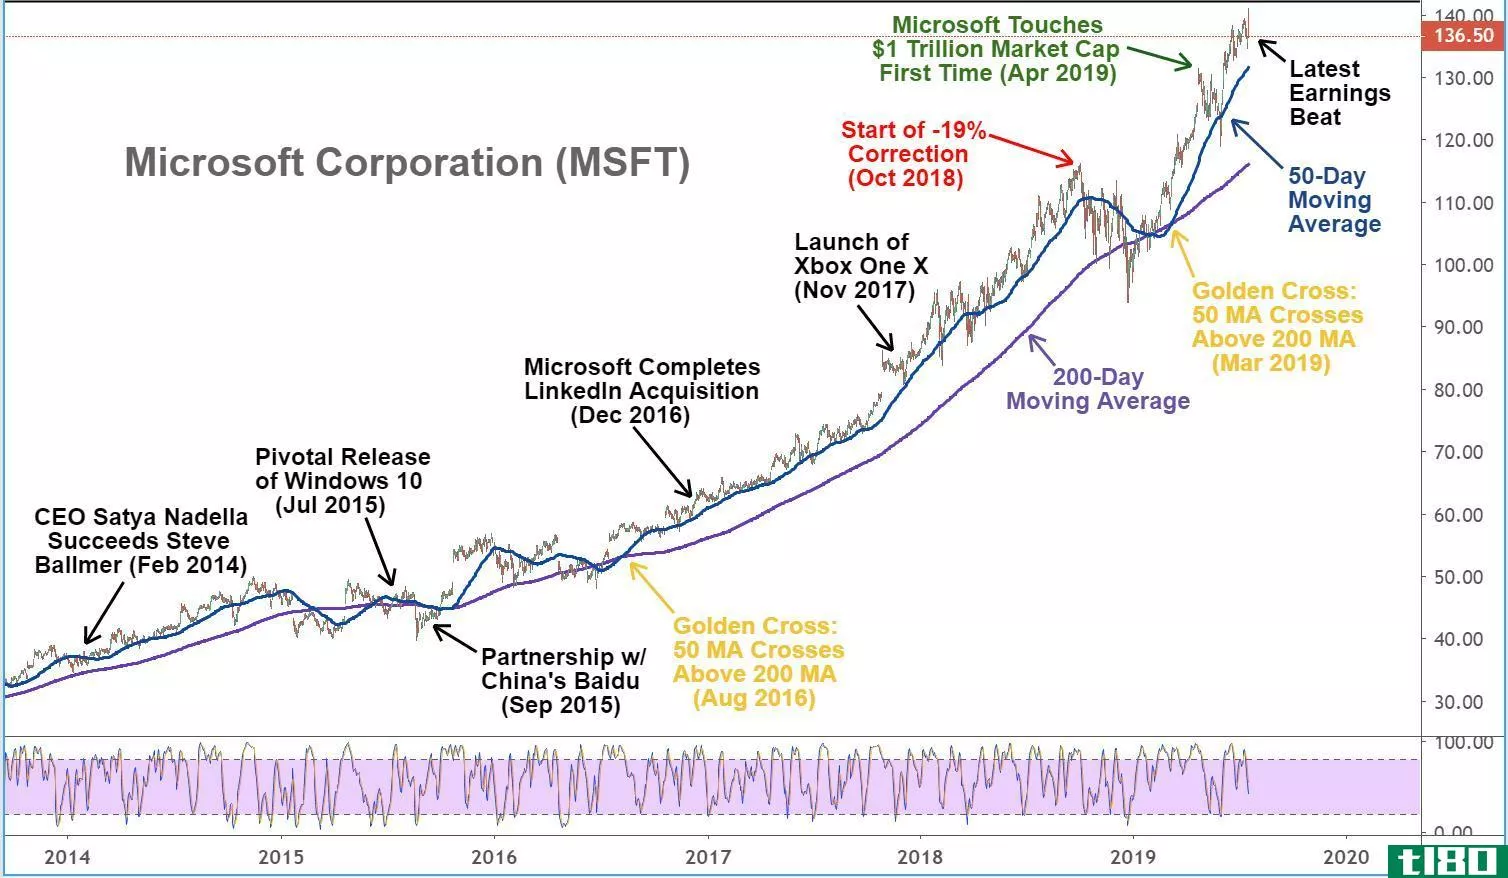 Chart showing the share price performance of Microsoft Corporation (MSFT)